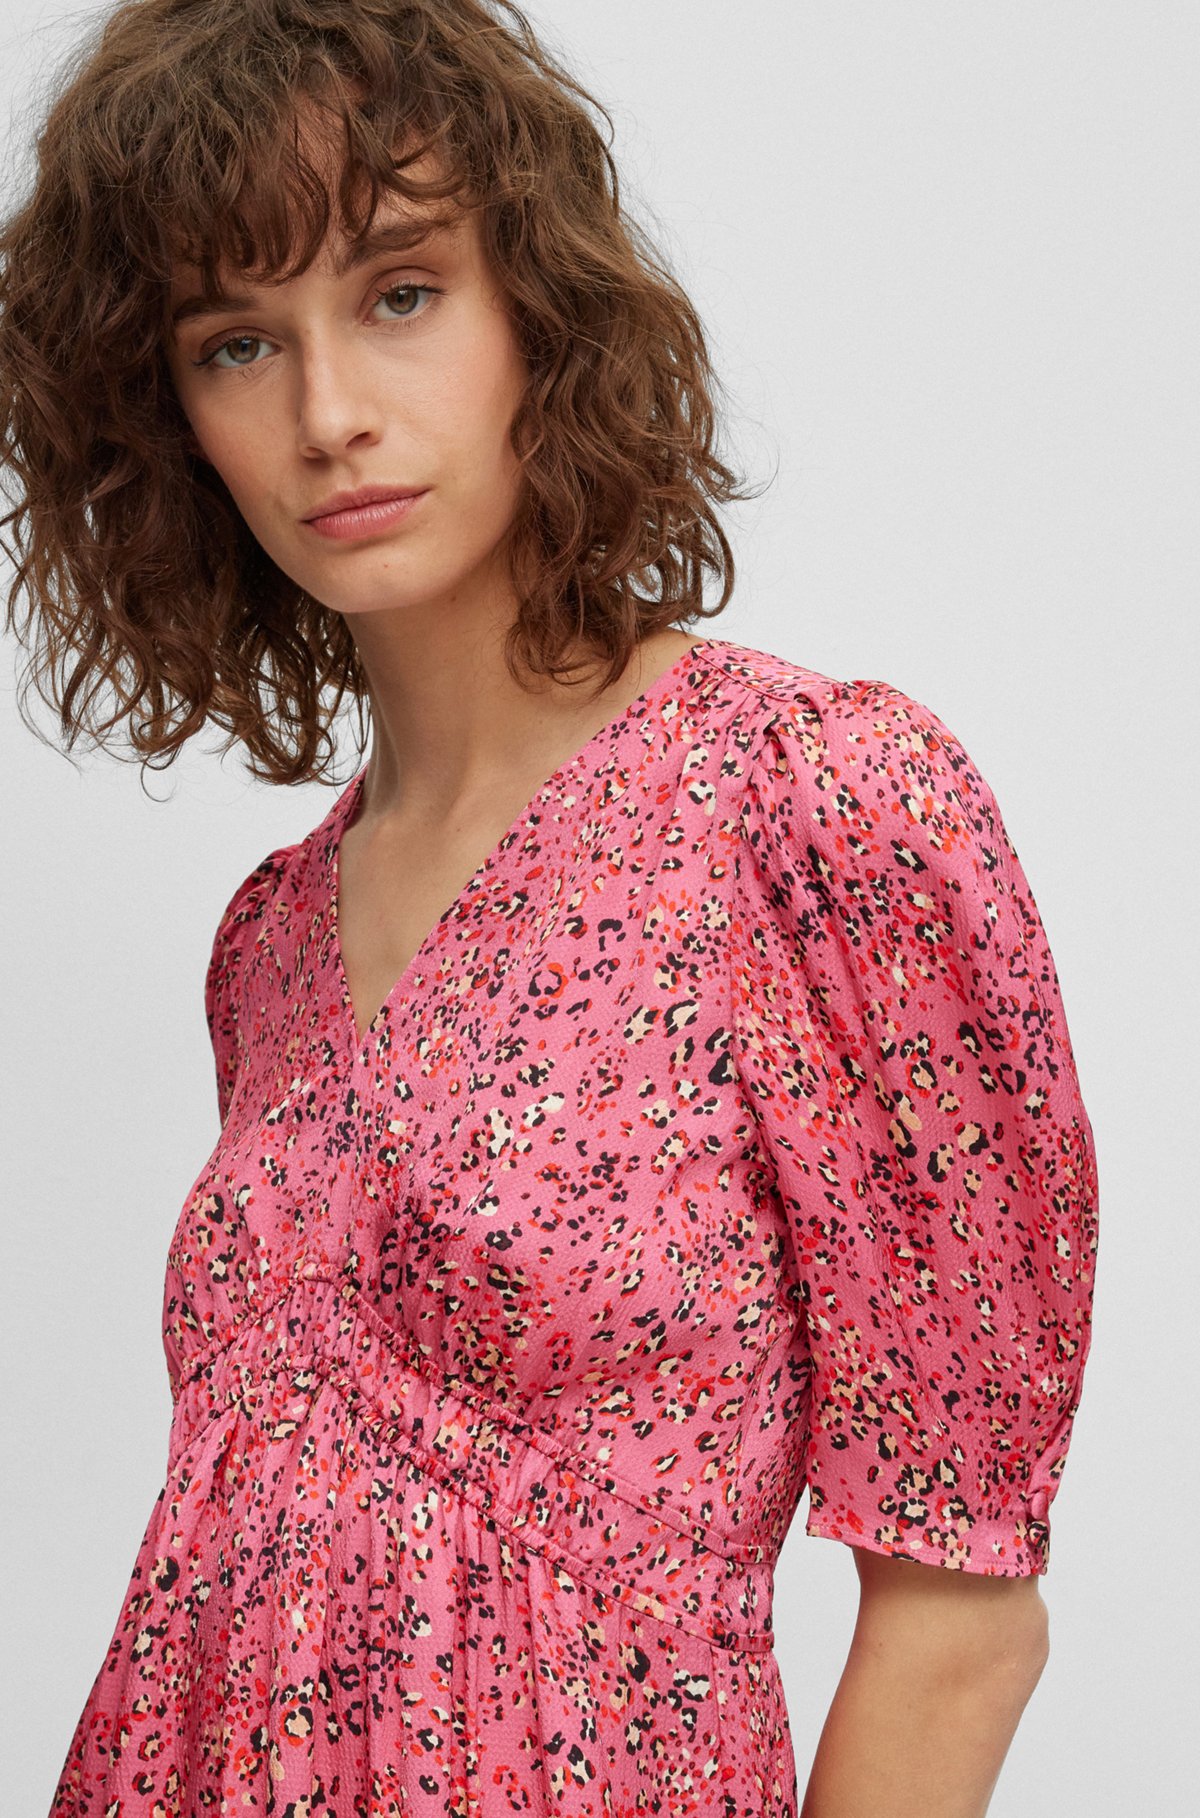 Puff-sleeve regular-fit dress with floral print, Patterned